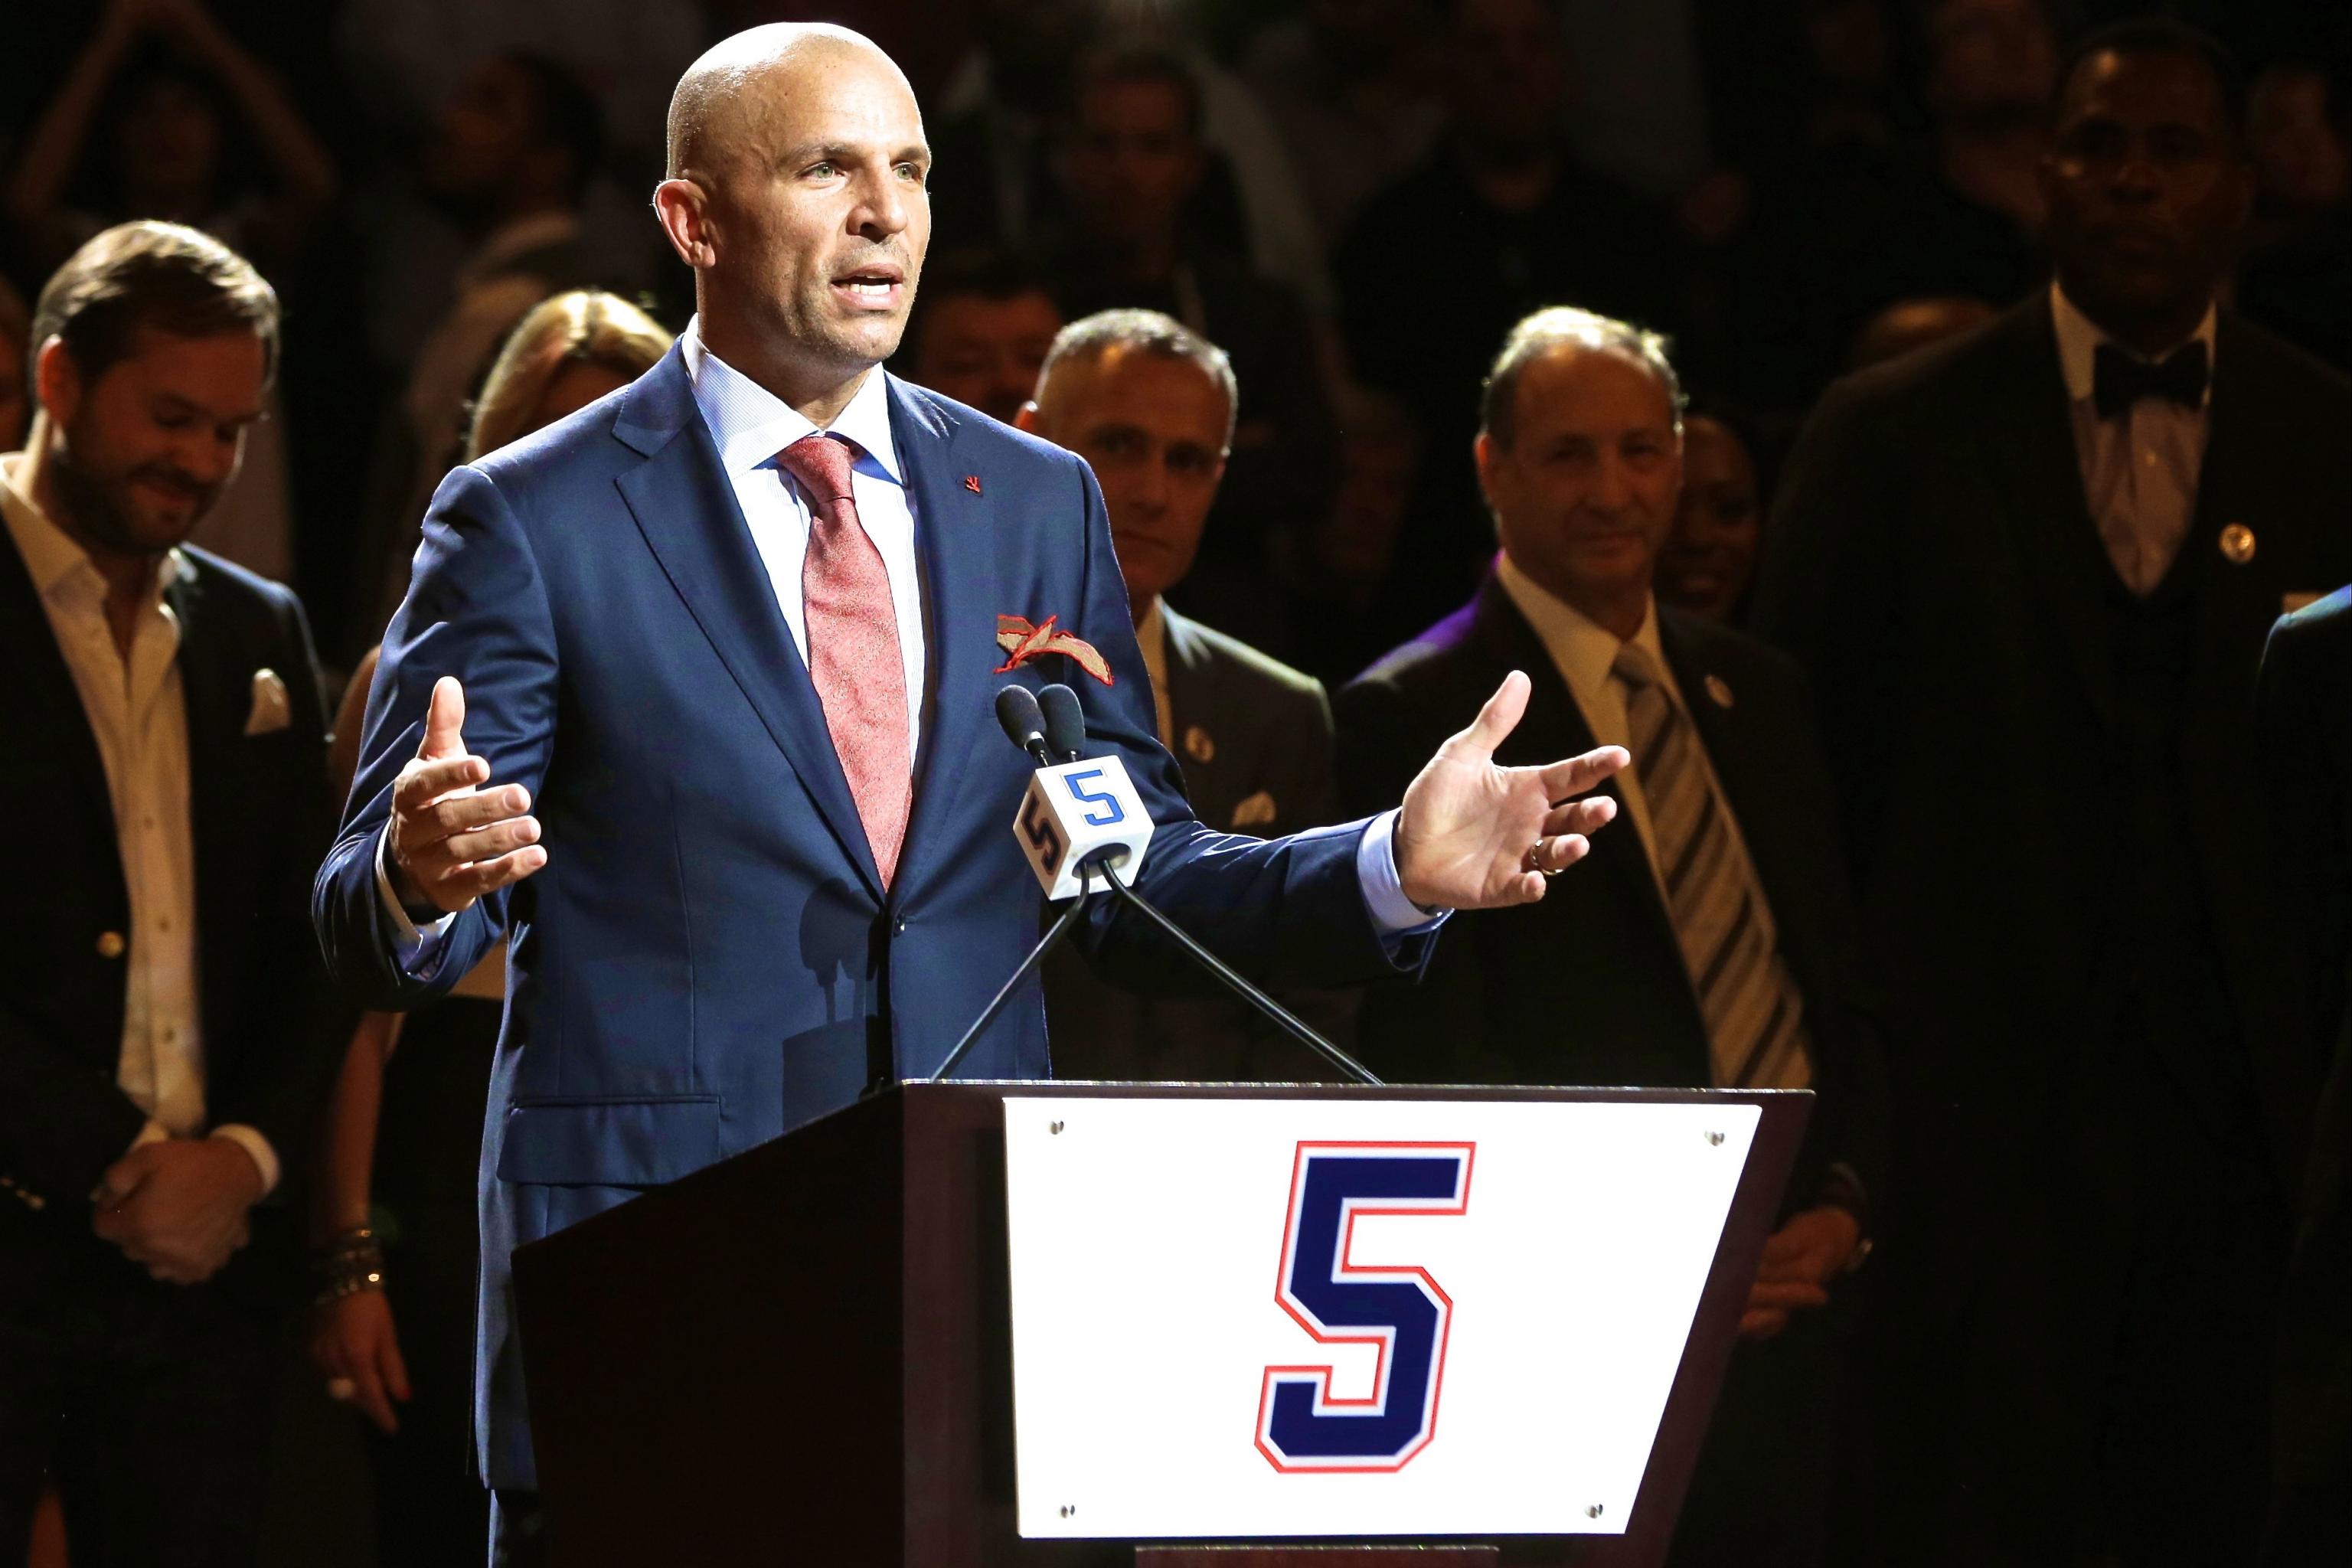 Jason Kidd Retires From The NBA – The Brooklyn Game